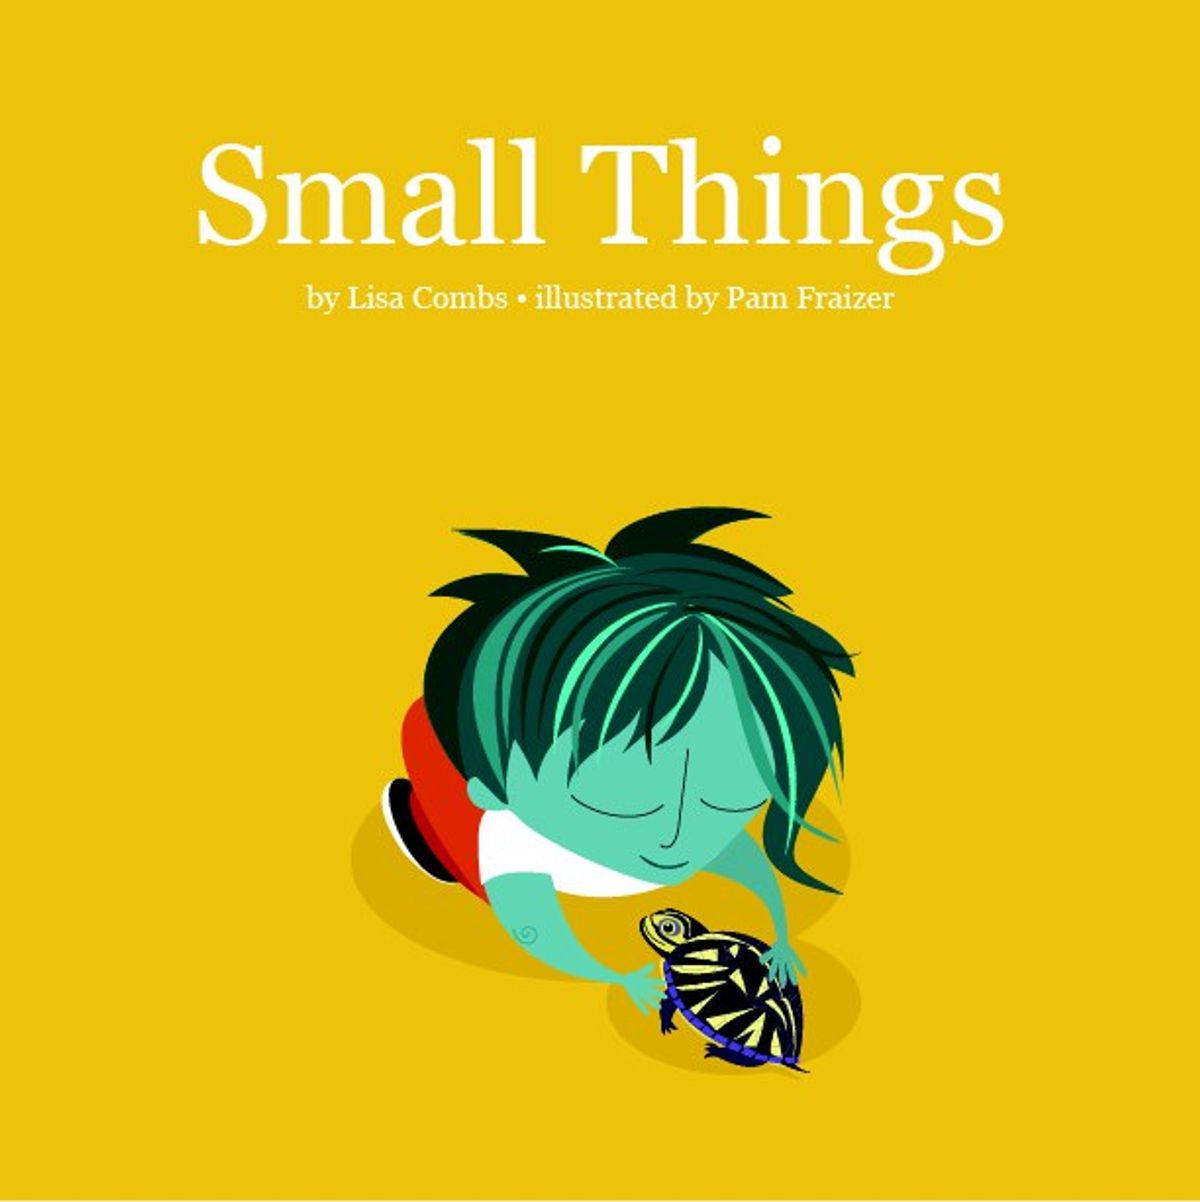 "Small Things," the next book from Best Friend Books to be released soon!